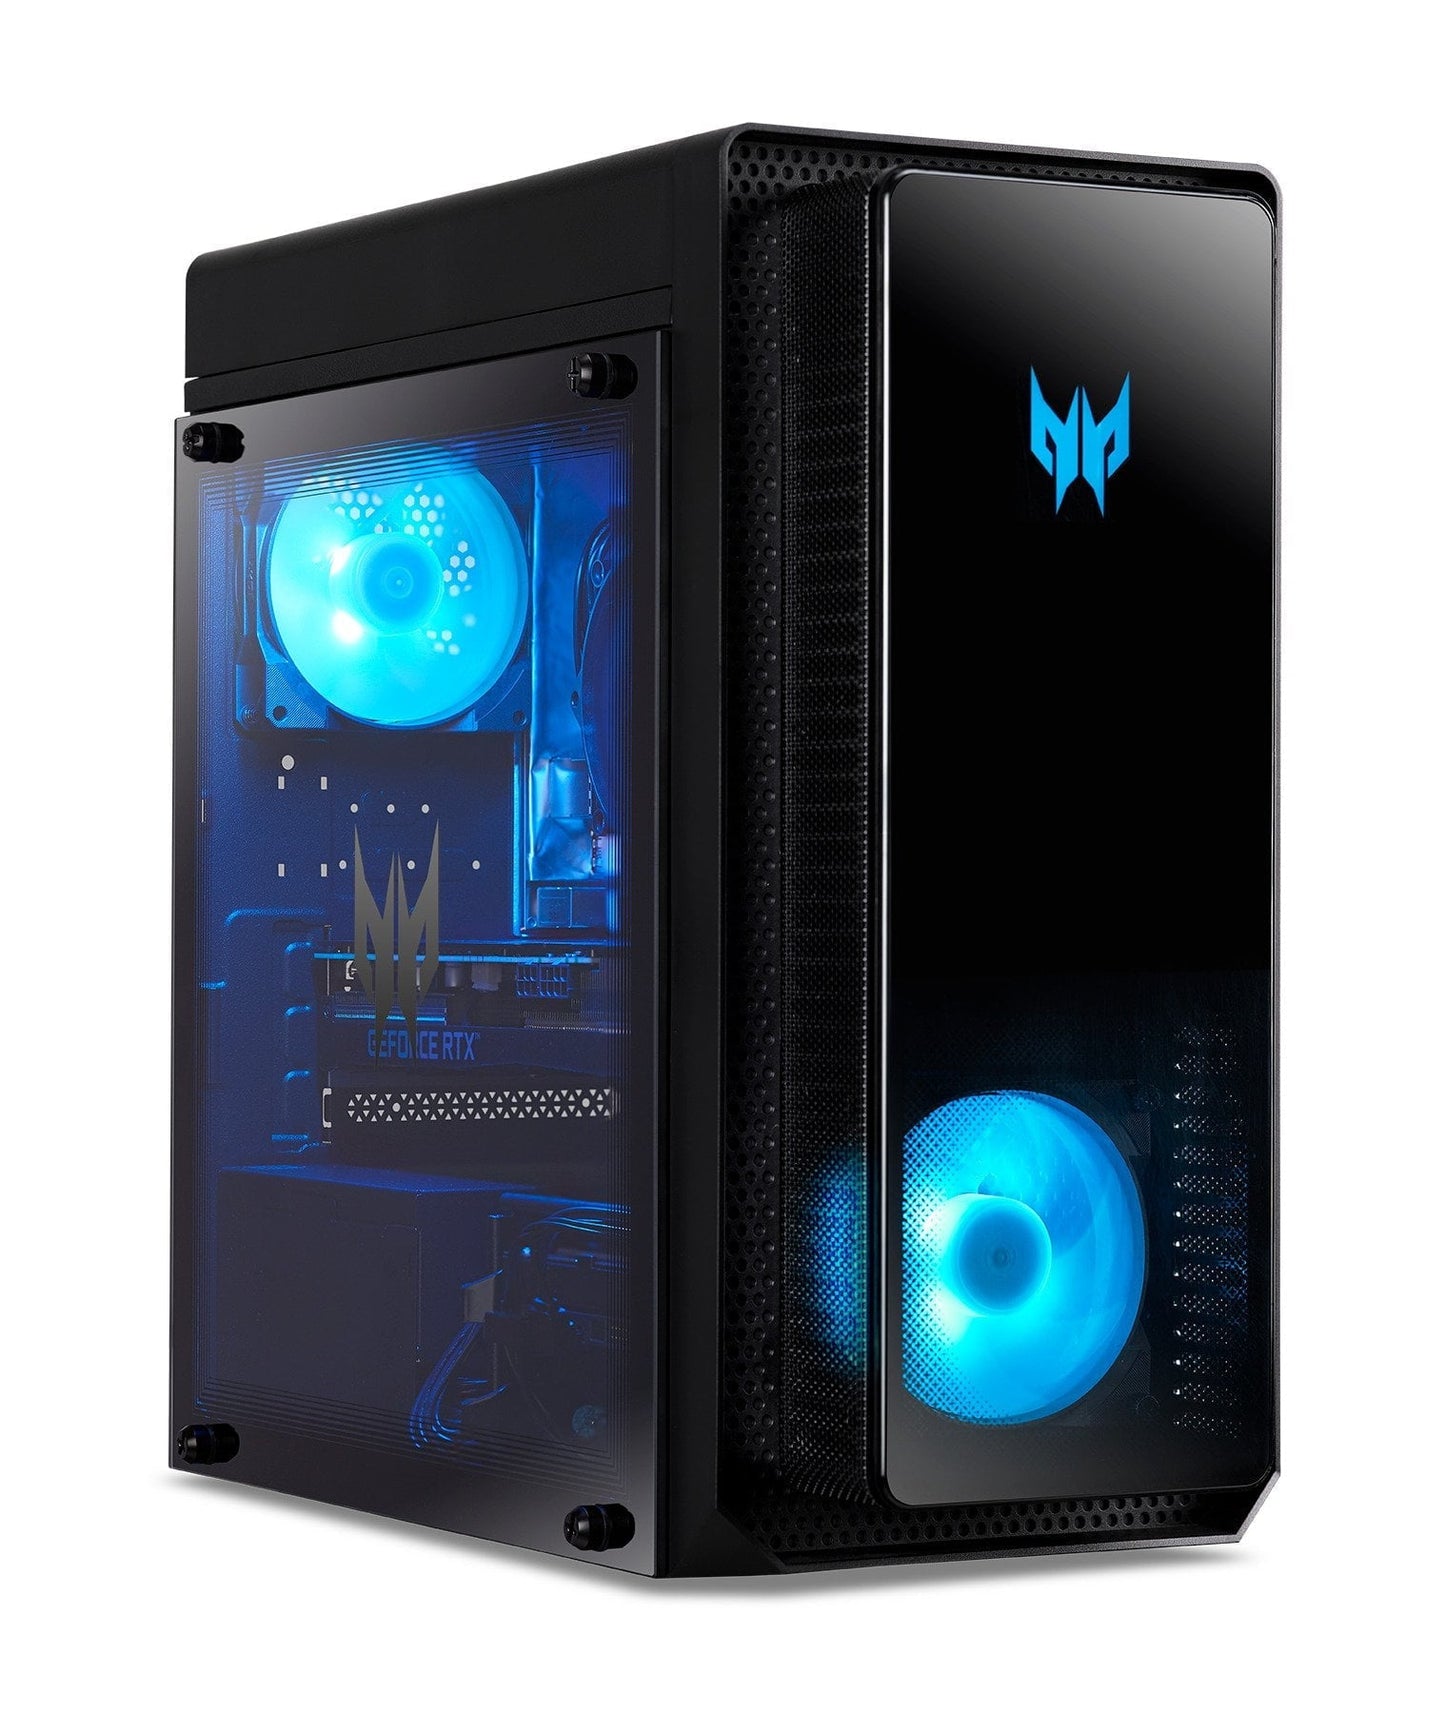 Acer Predator Orion 3000 Gaming/Entertainment Desktop PC (Intel i7-12700F 12-Core. NVIDIA GeForce RTX 3070. 128GB RAM. Win 11 Home) with WD19S 180W Dock